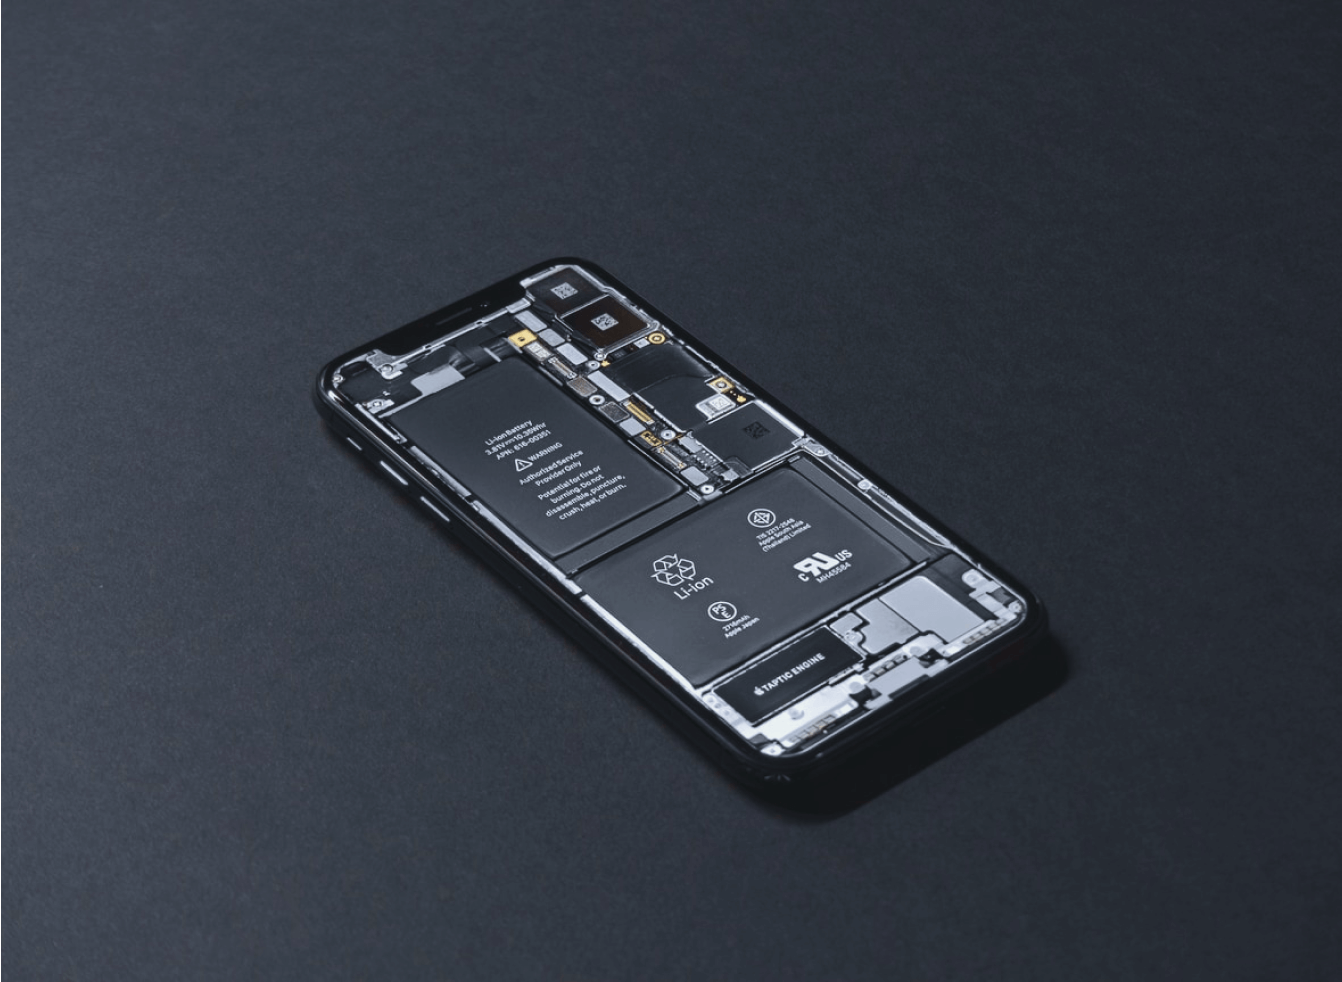 iPhone with interiors exposed